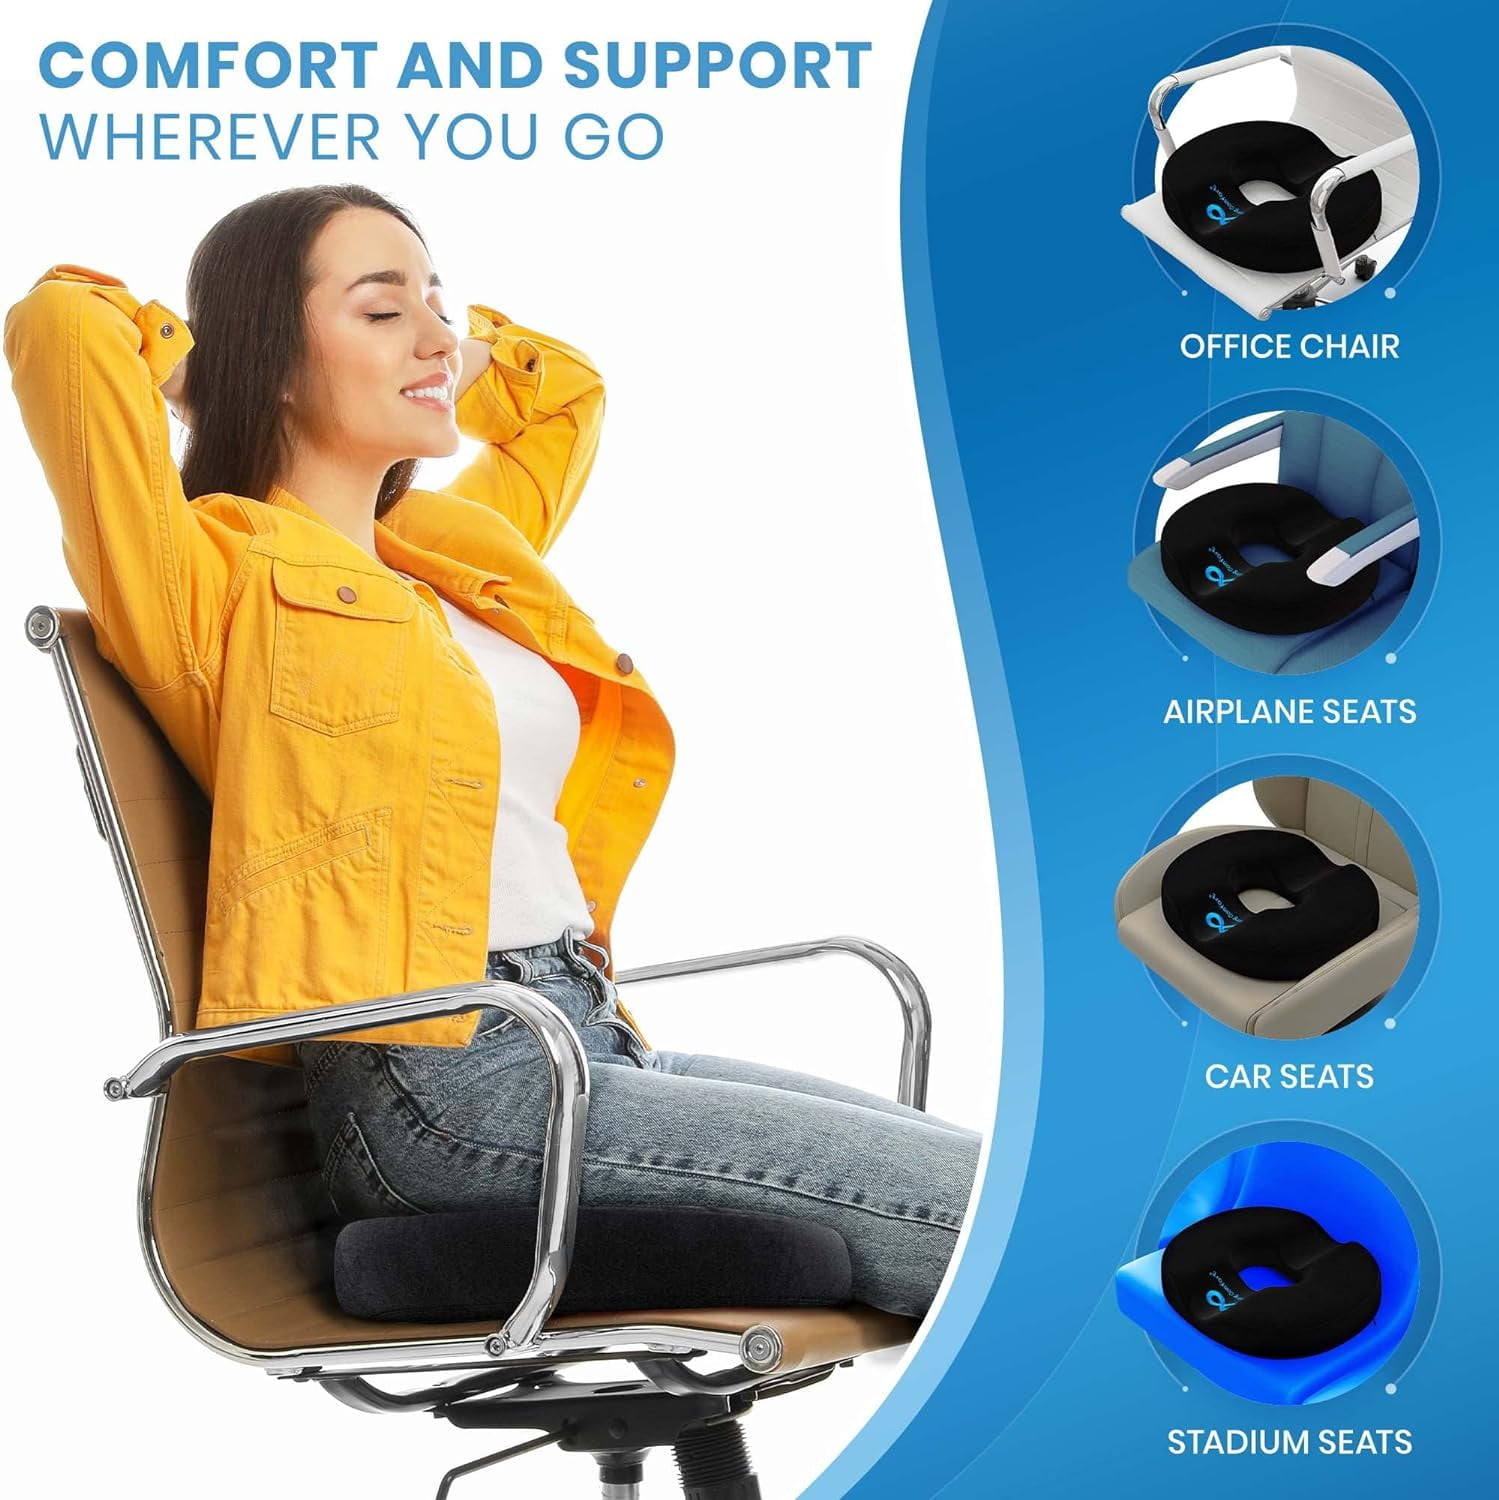  LAMPPE Coccyx Pillow for Tailbone Pain, Donut Cushion